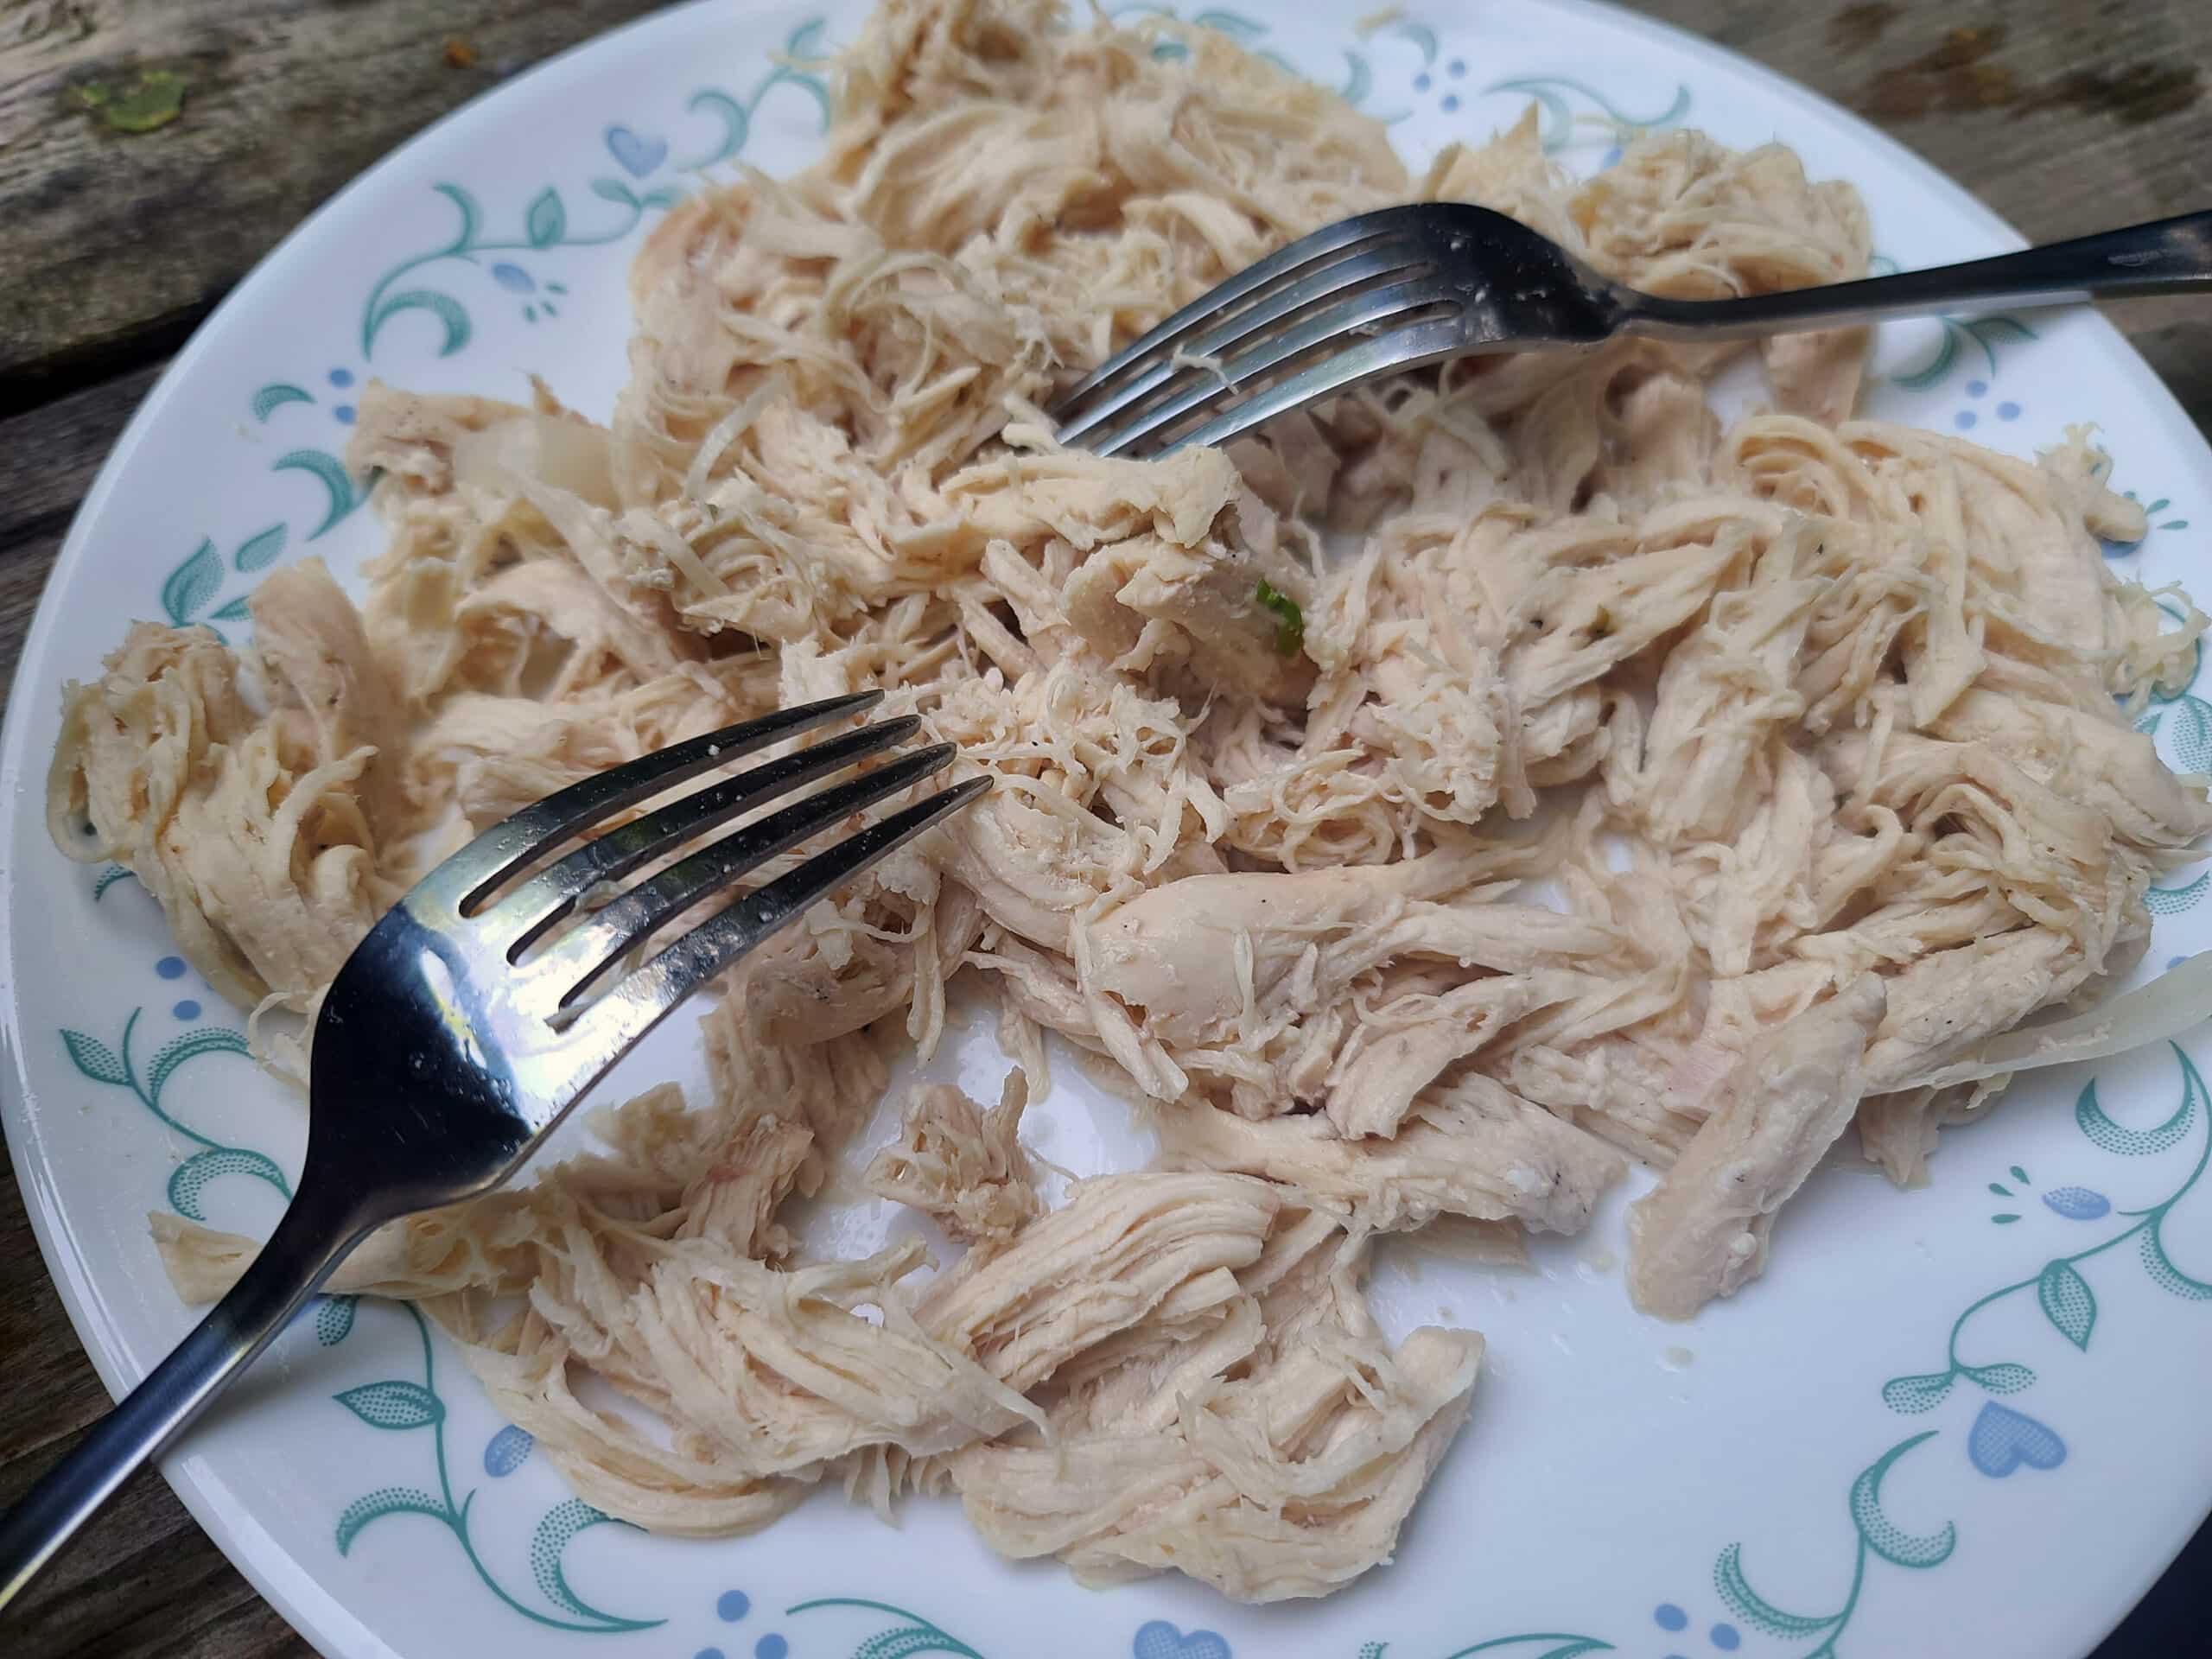 Pulled chicken on a plate, with two forks.